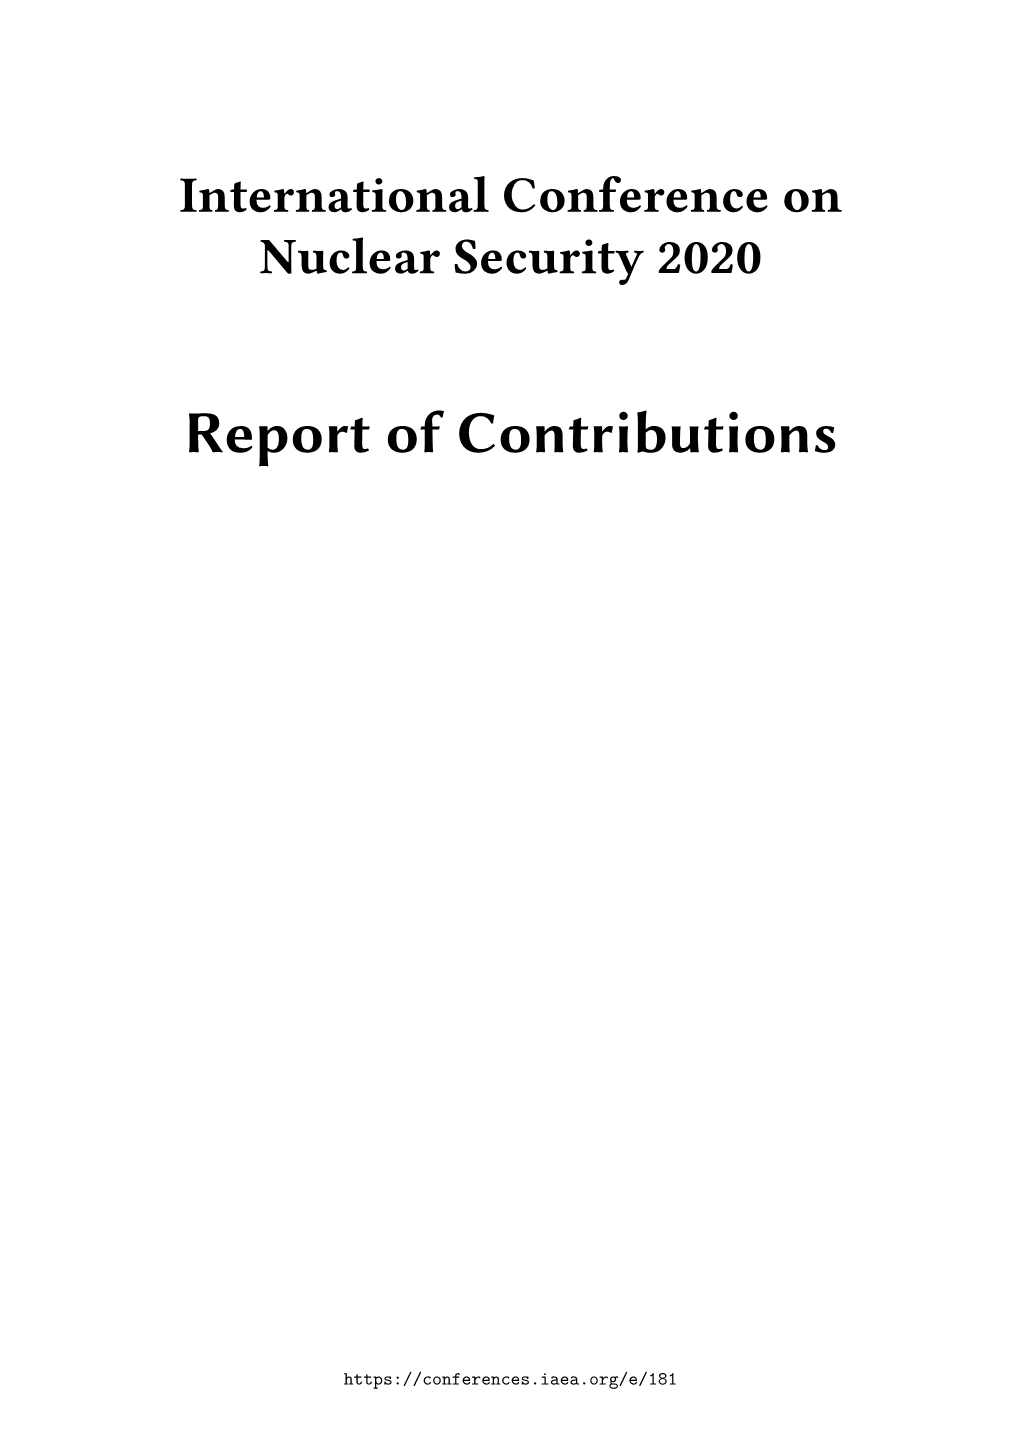 Report of Contributions